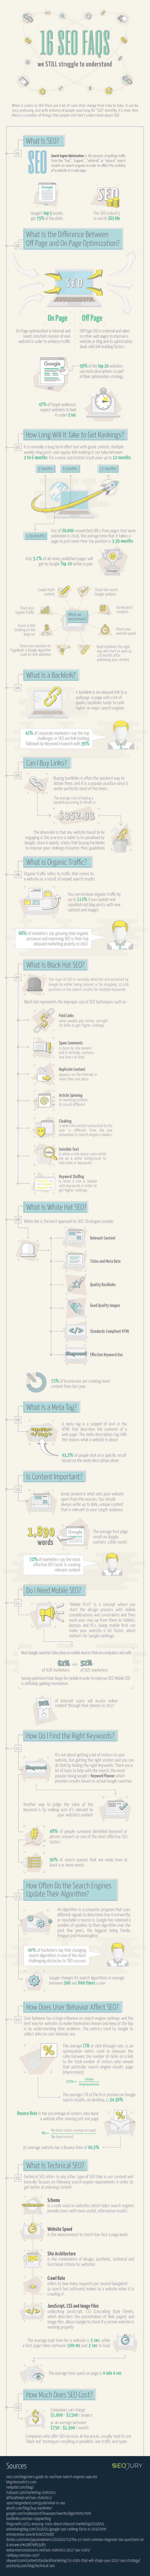 16 SEO FAQs We Still Struggle to Understand - #Infographic